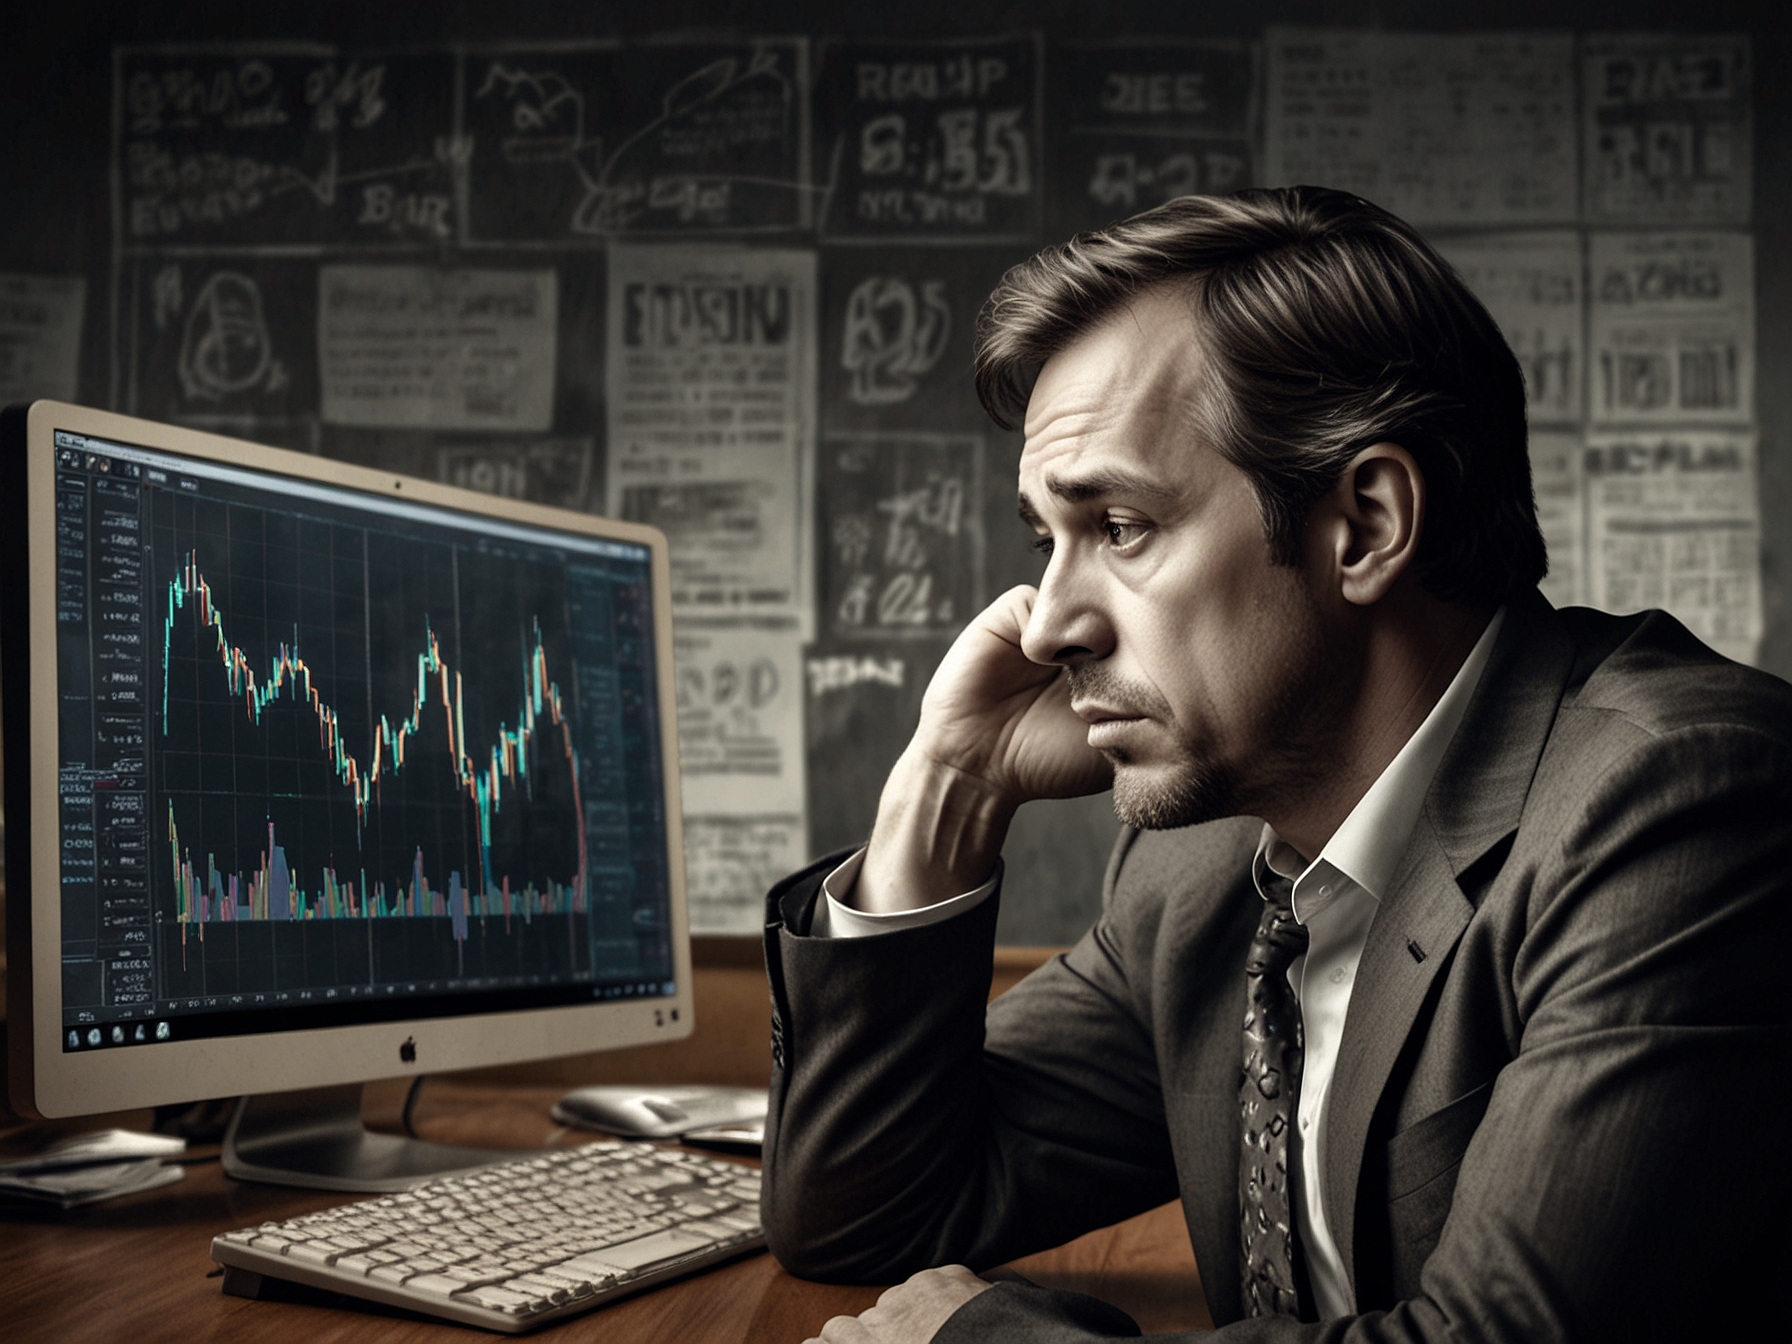 A worried investor looking at financial news, representing concern over increased short interest in Graphic Packaging Holding due to potential economic and operational challenges.